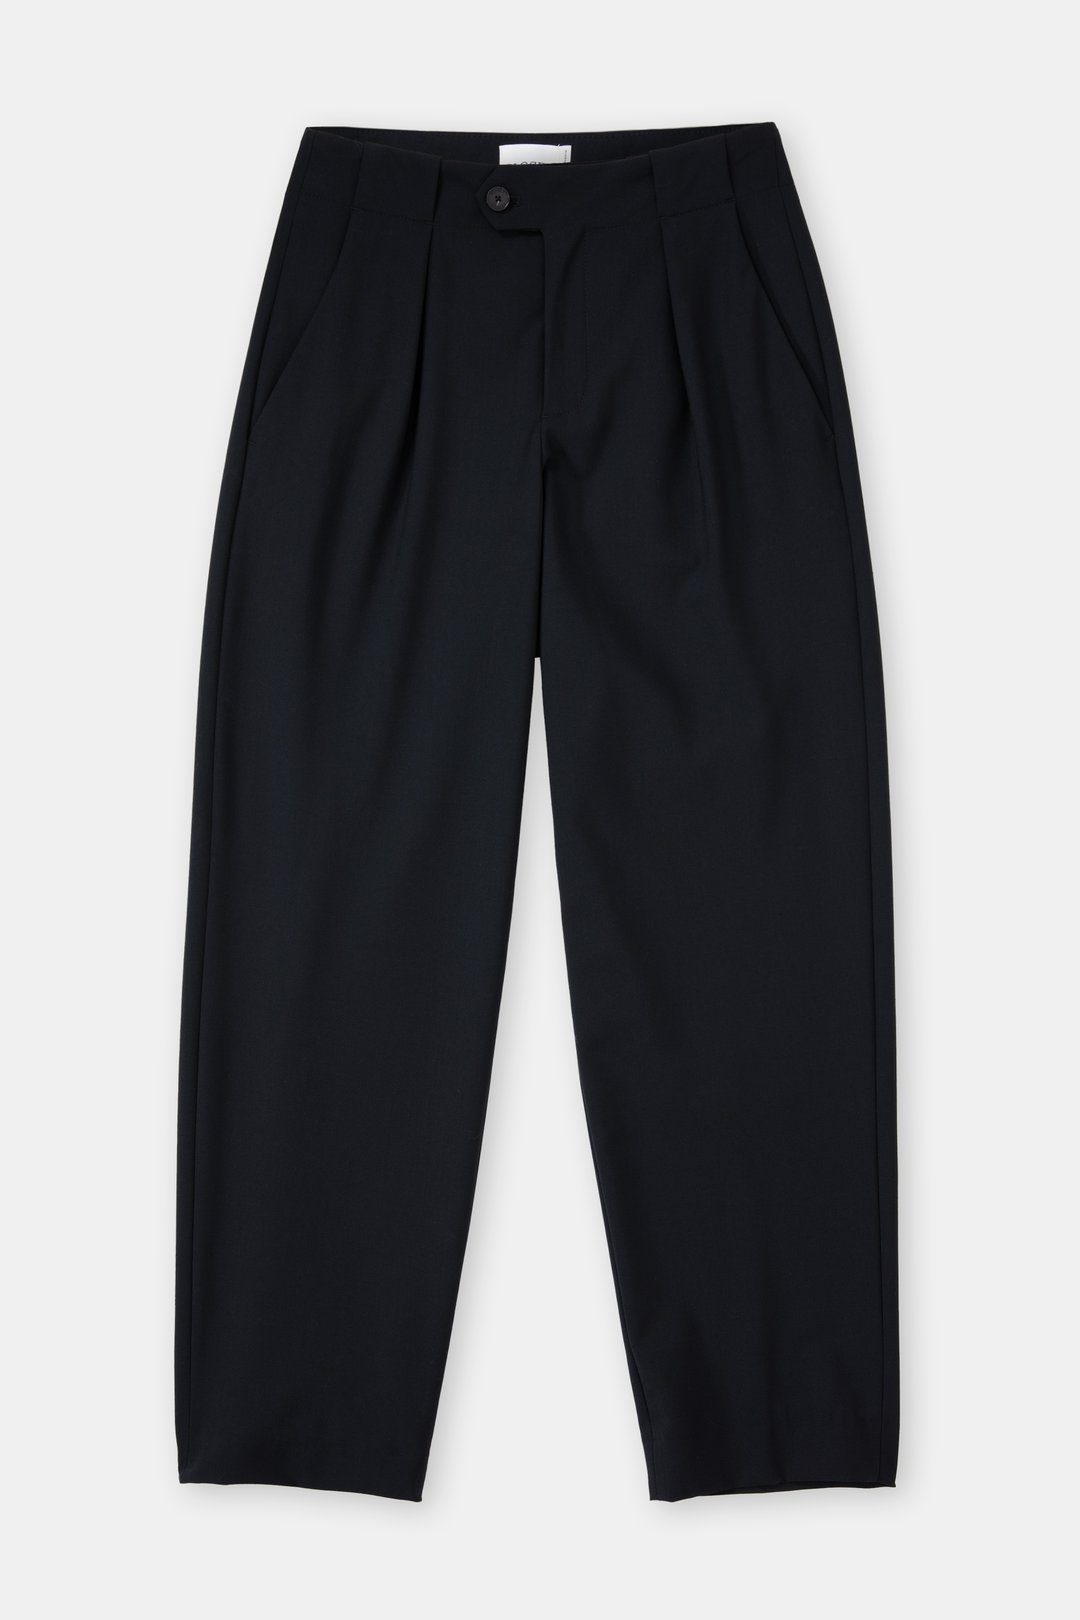 Relaxed Side Pocket Pants – Lazynoon